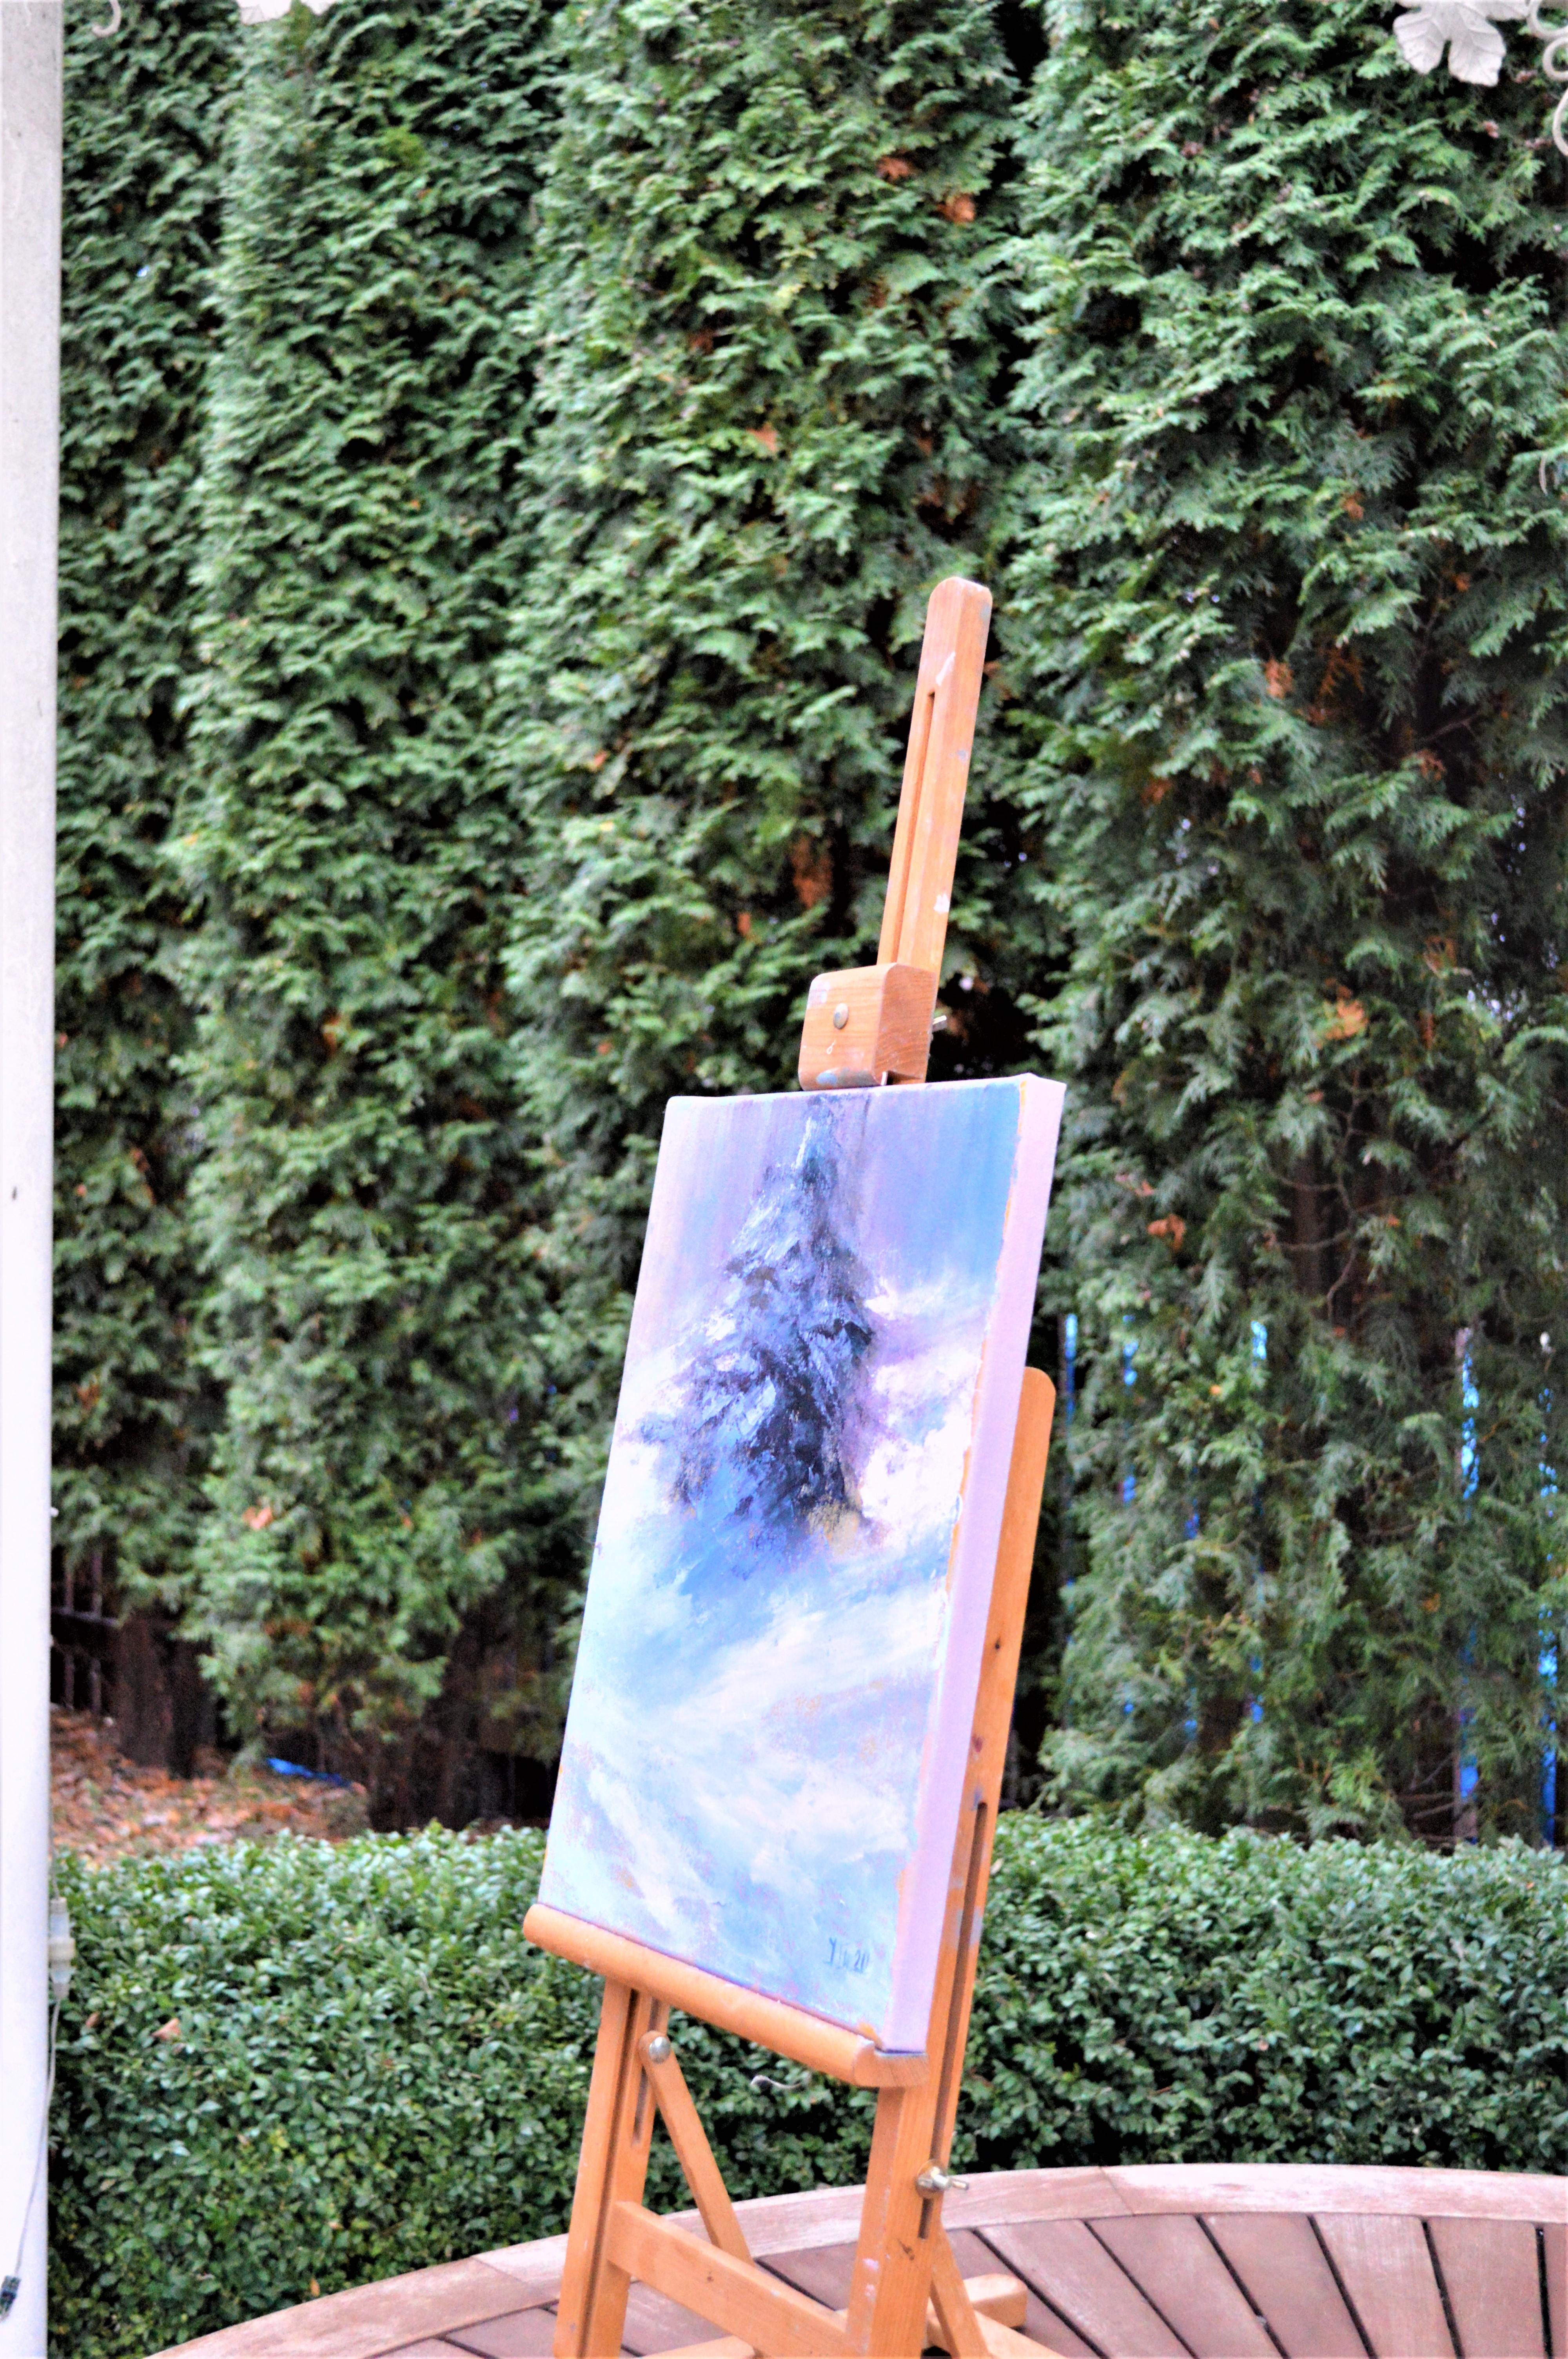 In my artwork, I've captured the serene majesty of a solitary evergreen standing resilient amidst a tranquil snowy landscape. Every stroke of my oil paints breathes life into the contrasting cool blues and the warmth of the earth, embodying the